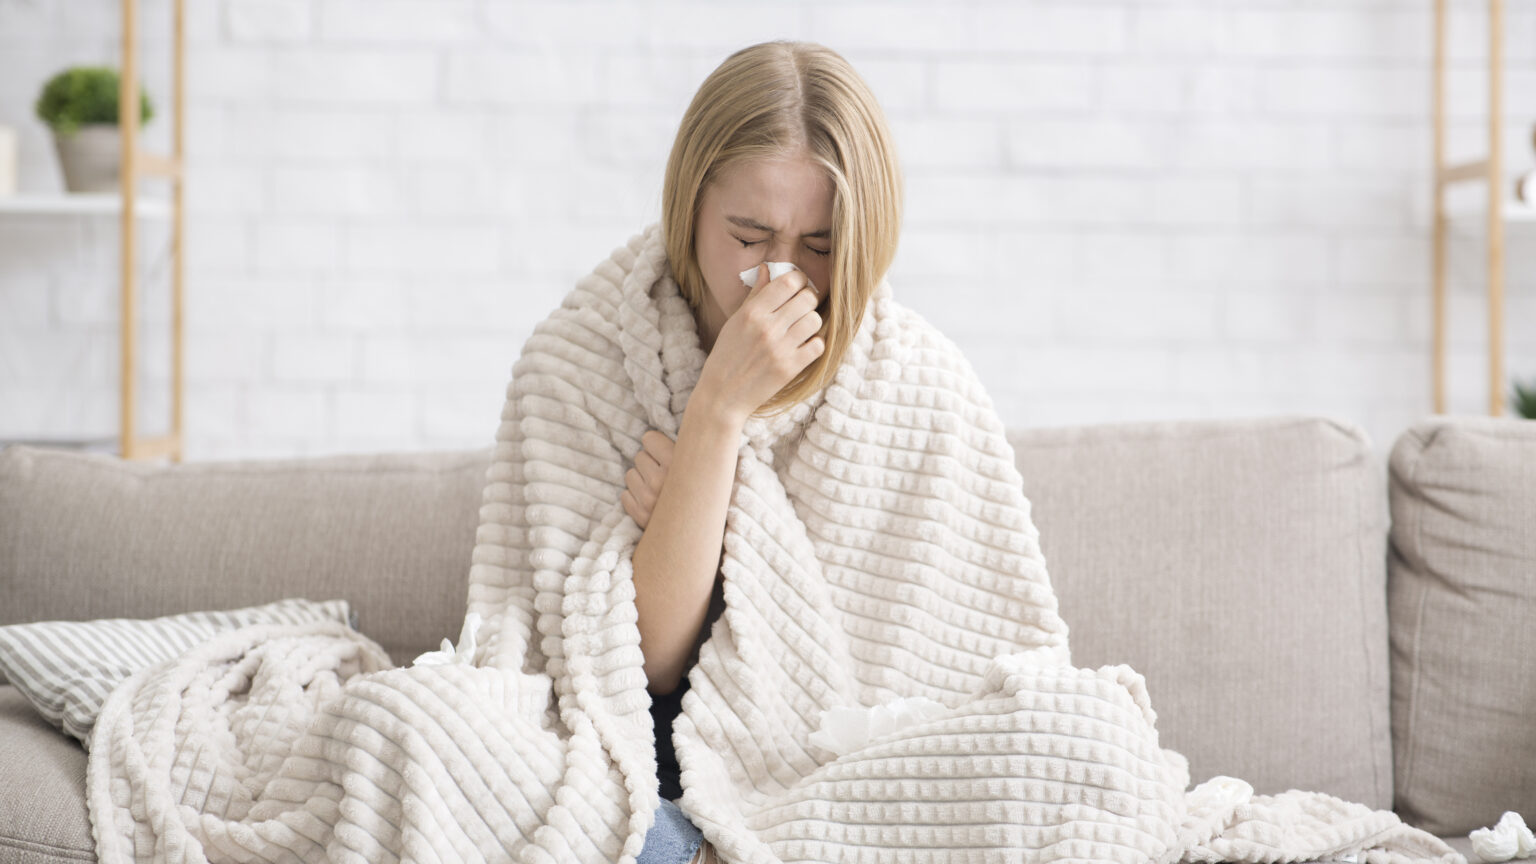 Young girl got sick, wrapped in blanket blowing nose - Wamberal Surgery